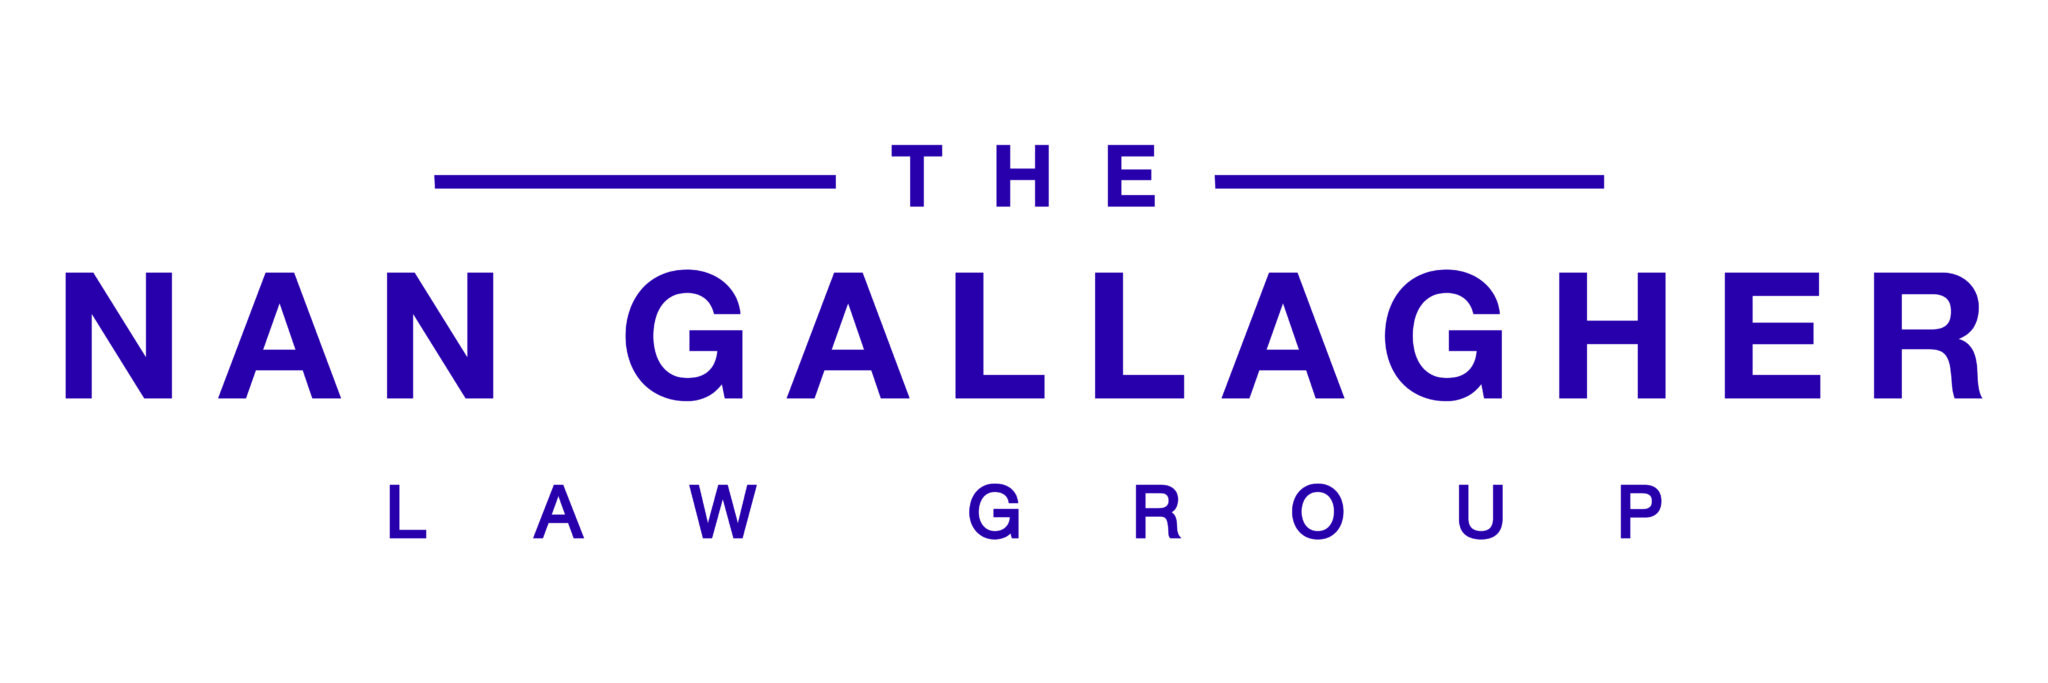 The Nan Gallagher Law Group